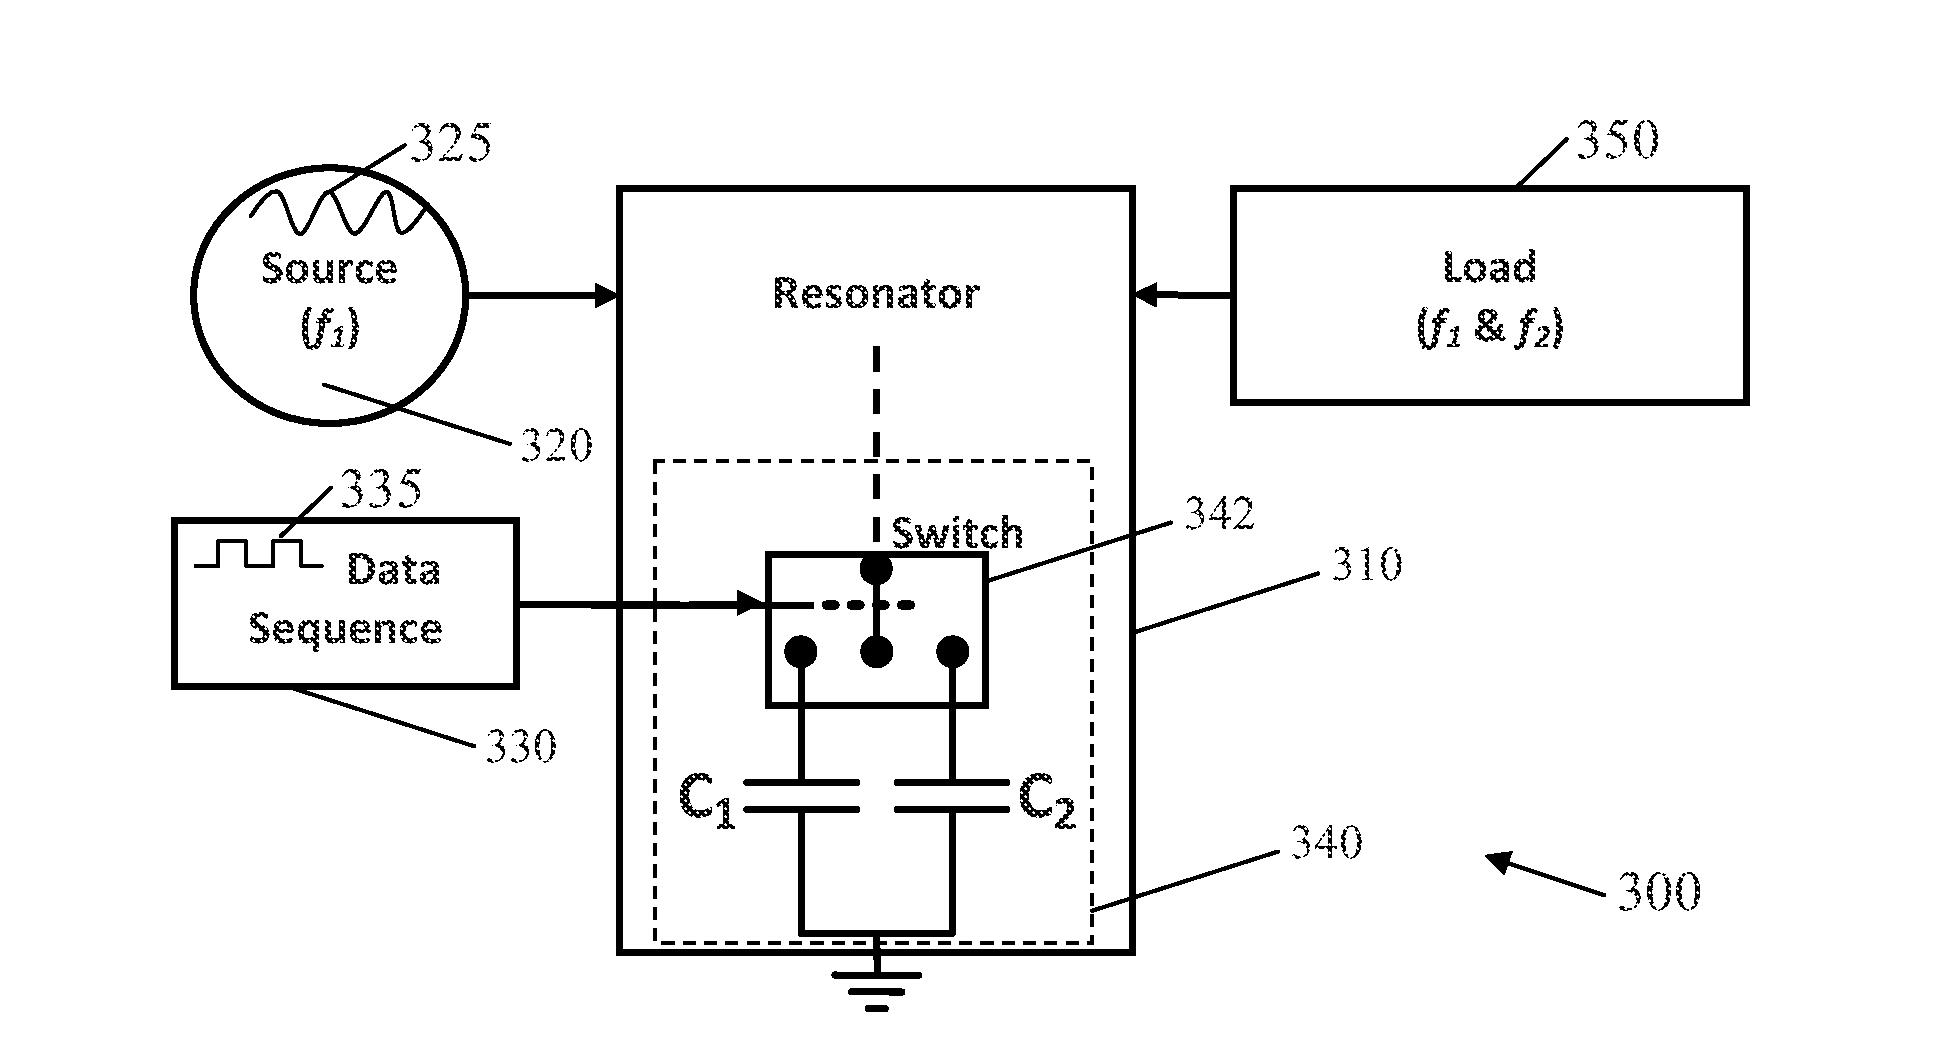 A time variant antenna for transmitting wideband signals